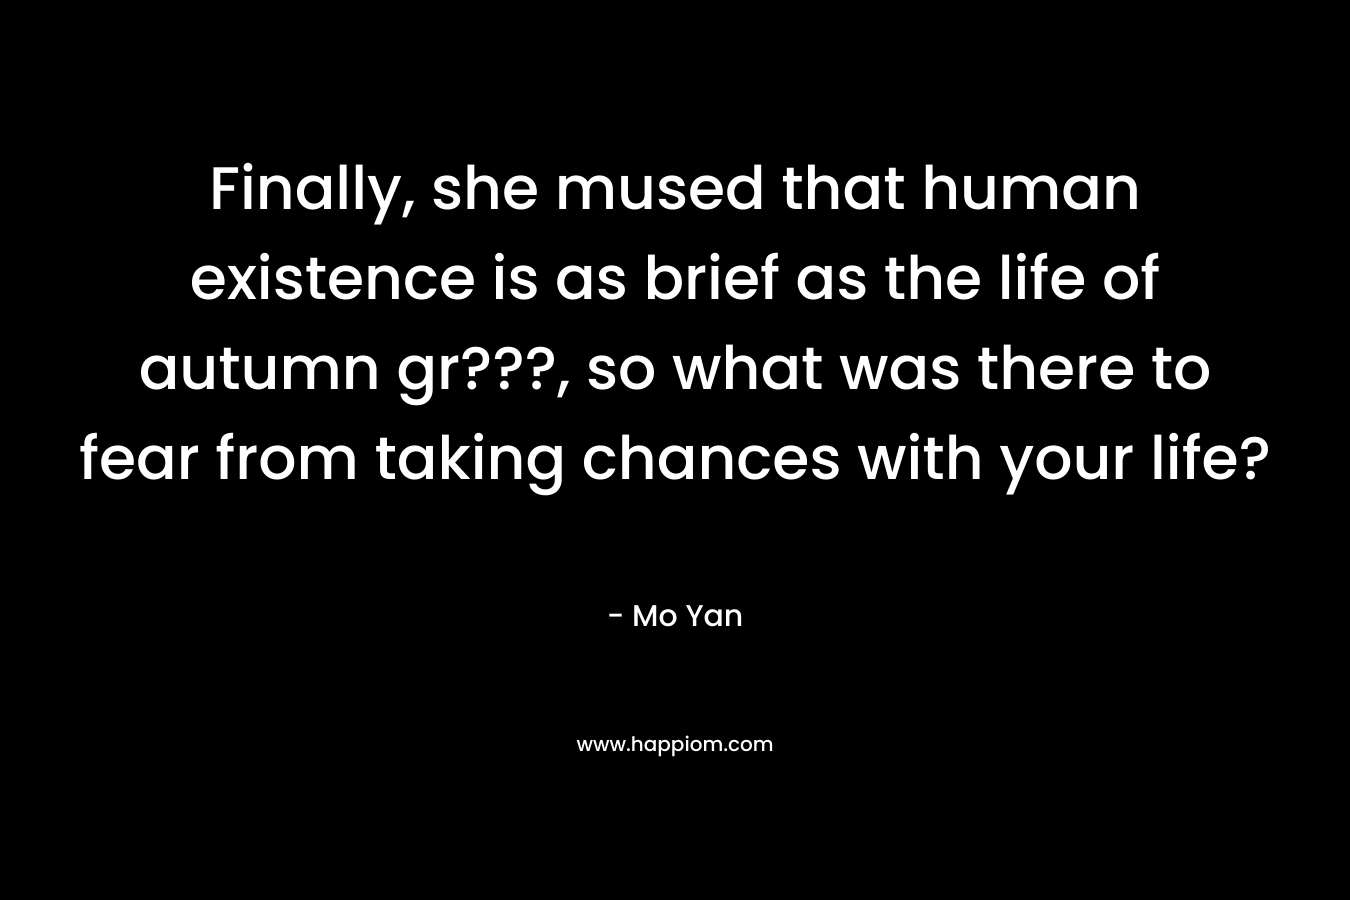 Finally, she mused that human existence is as brief as the life of autumn gr???, so what was there to fear from taking chances with your life? – Mo Yan